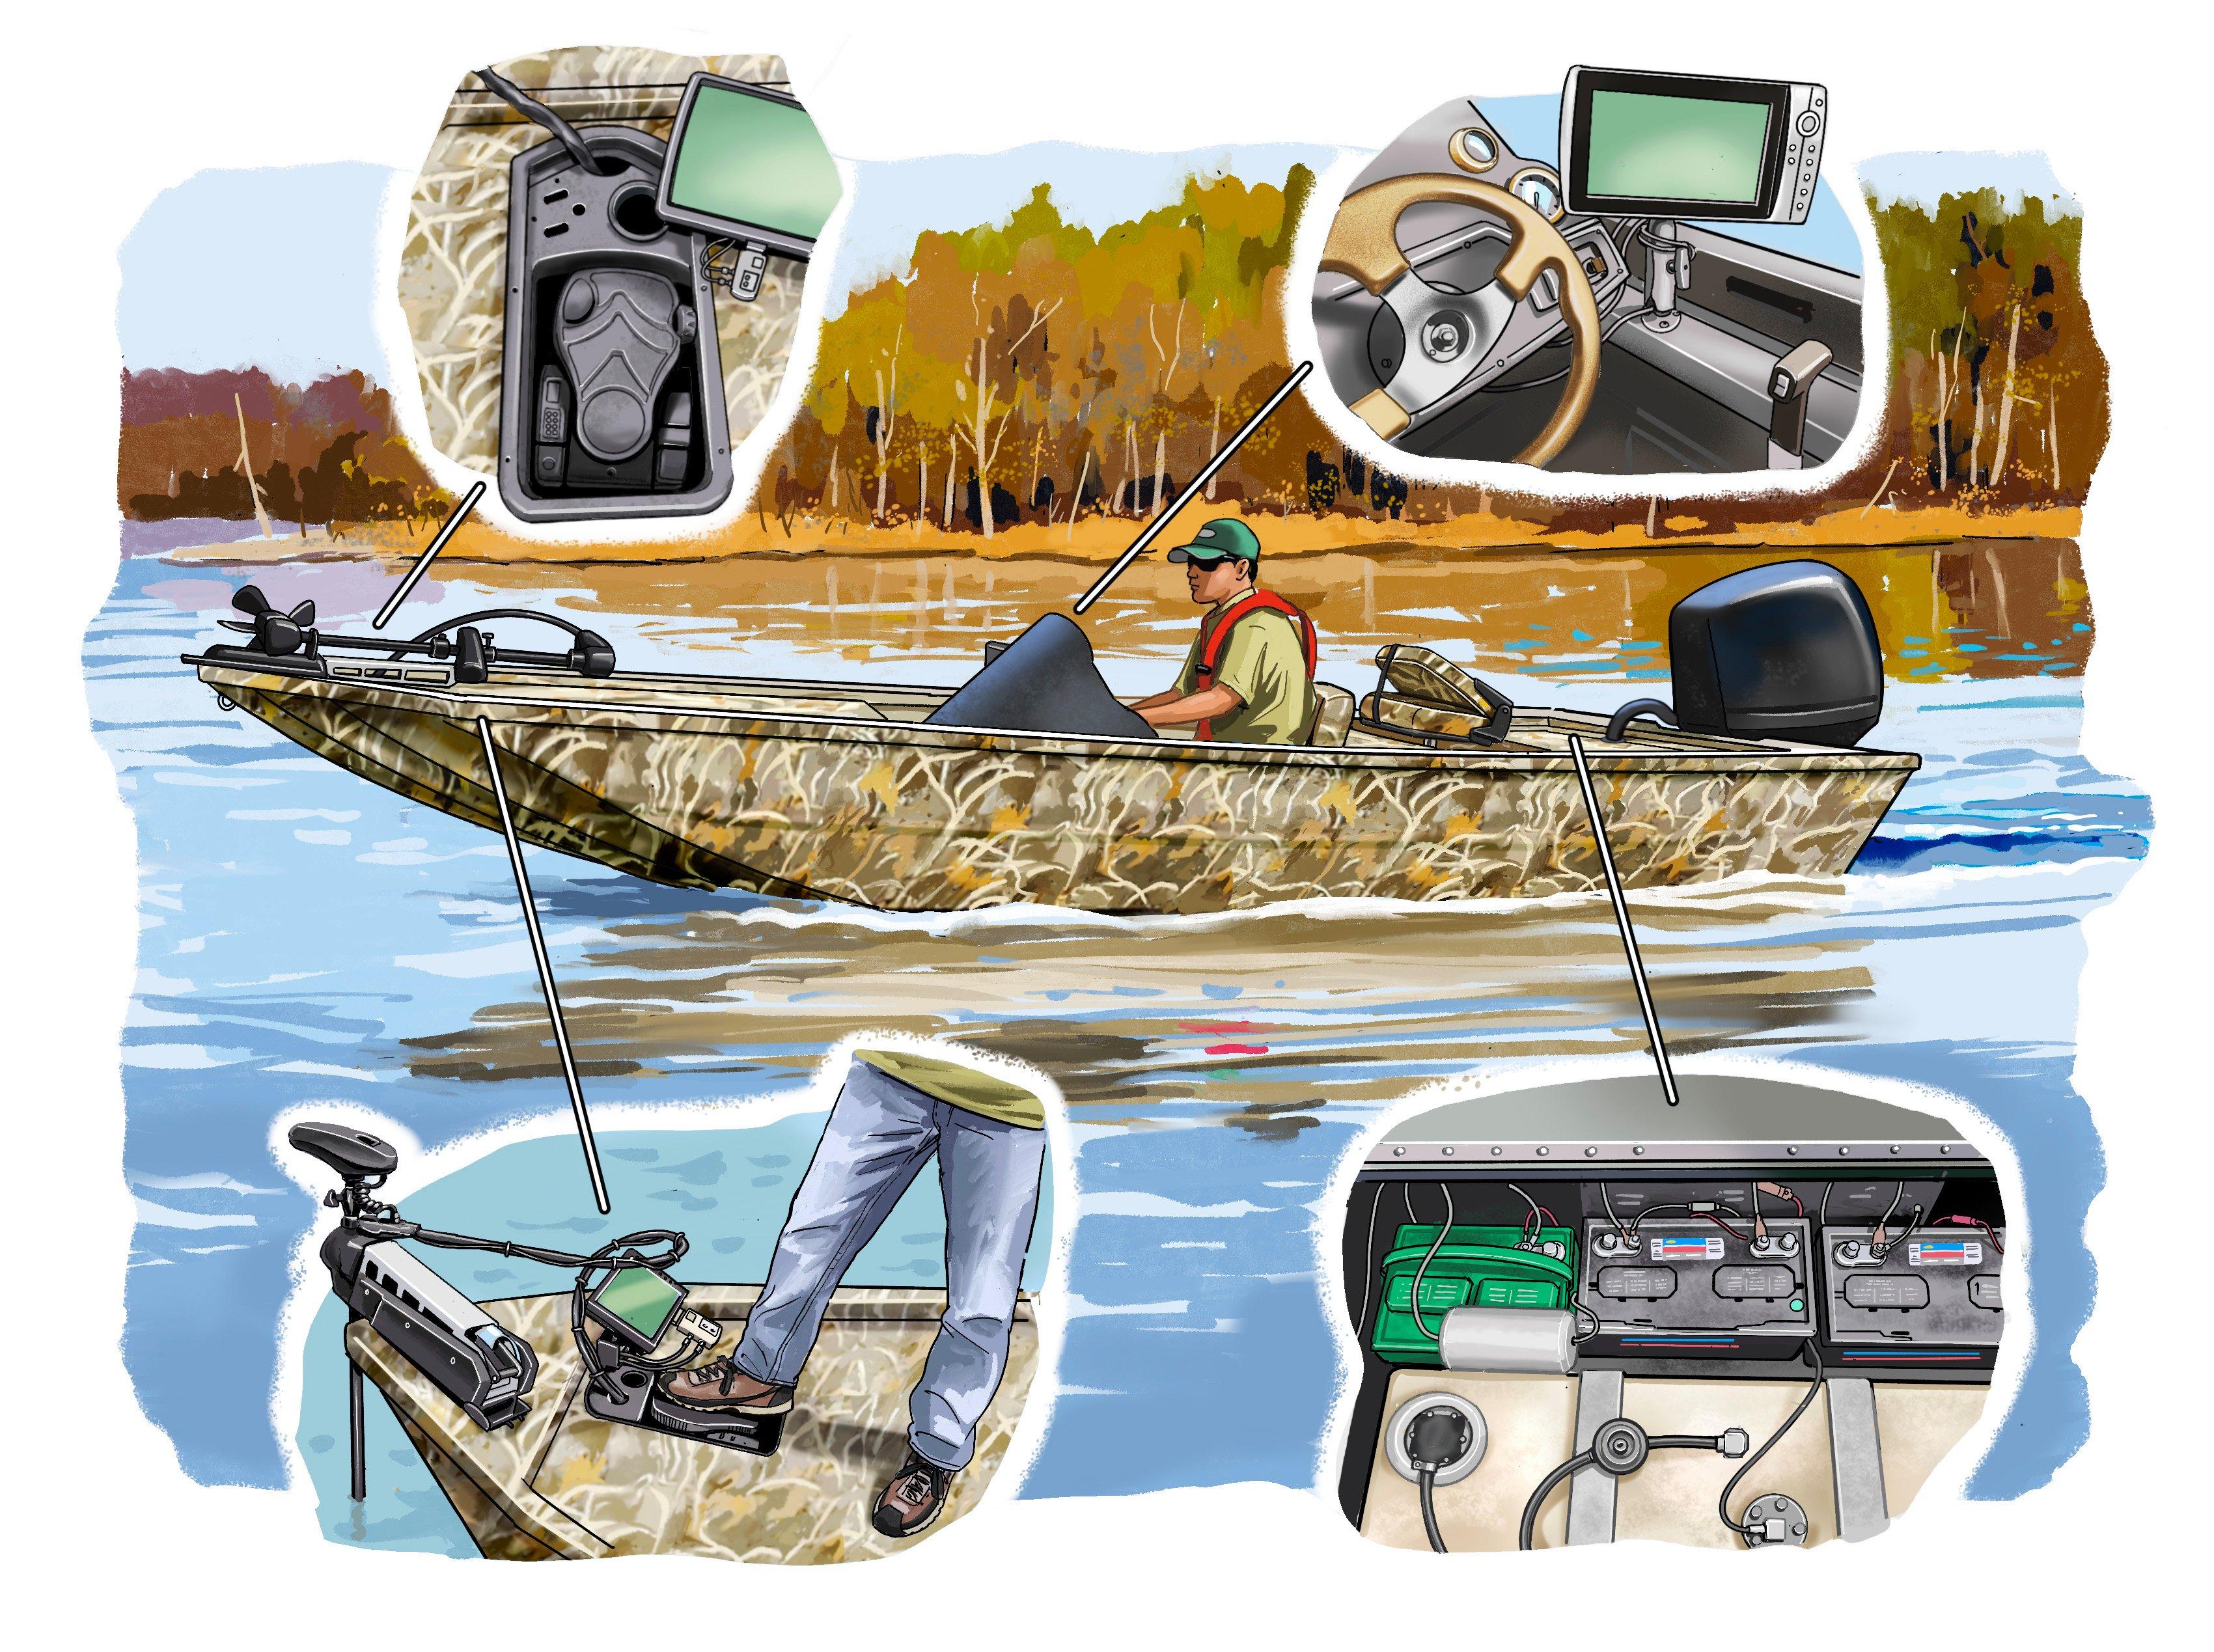 Worthwhile modifications include recessed trolling motor controls, RAM Mount electronics, and spacious storage for three batteries and onboard charger. Illustration by Steve Sanford